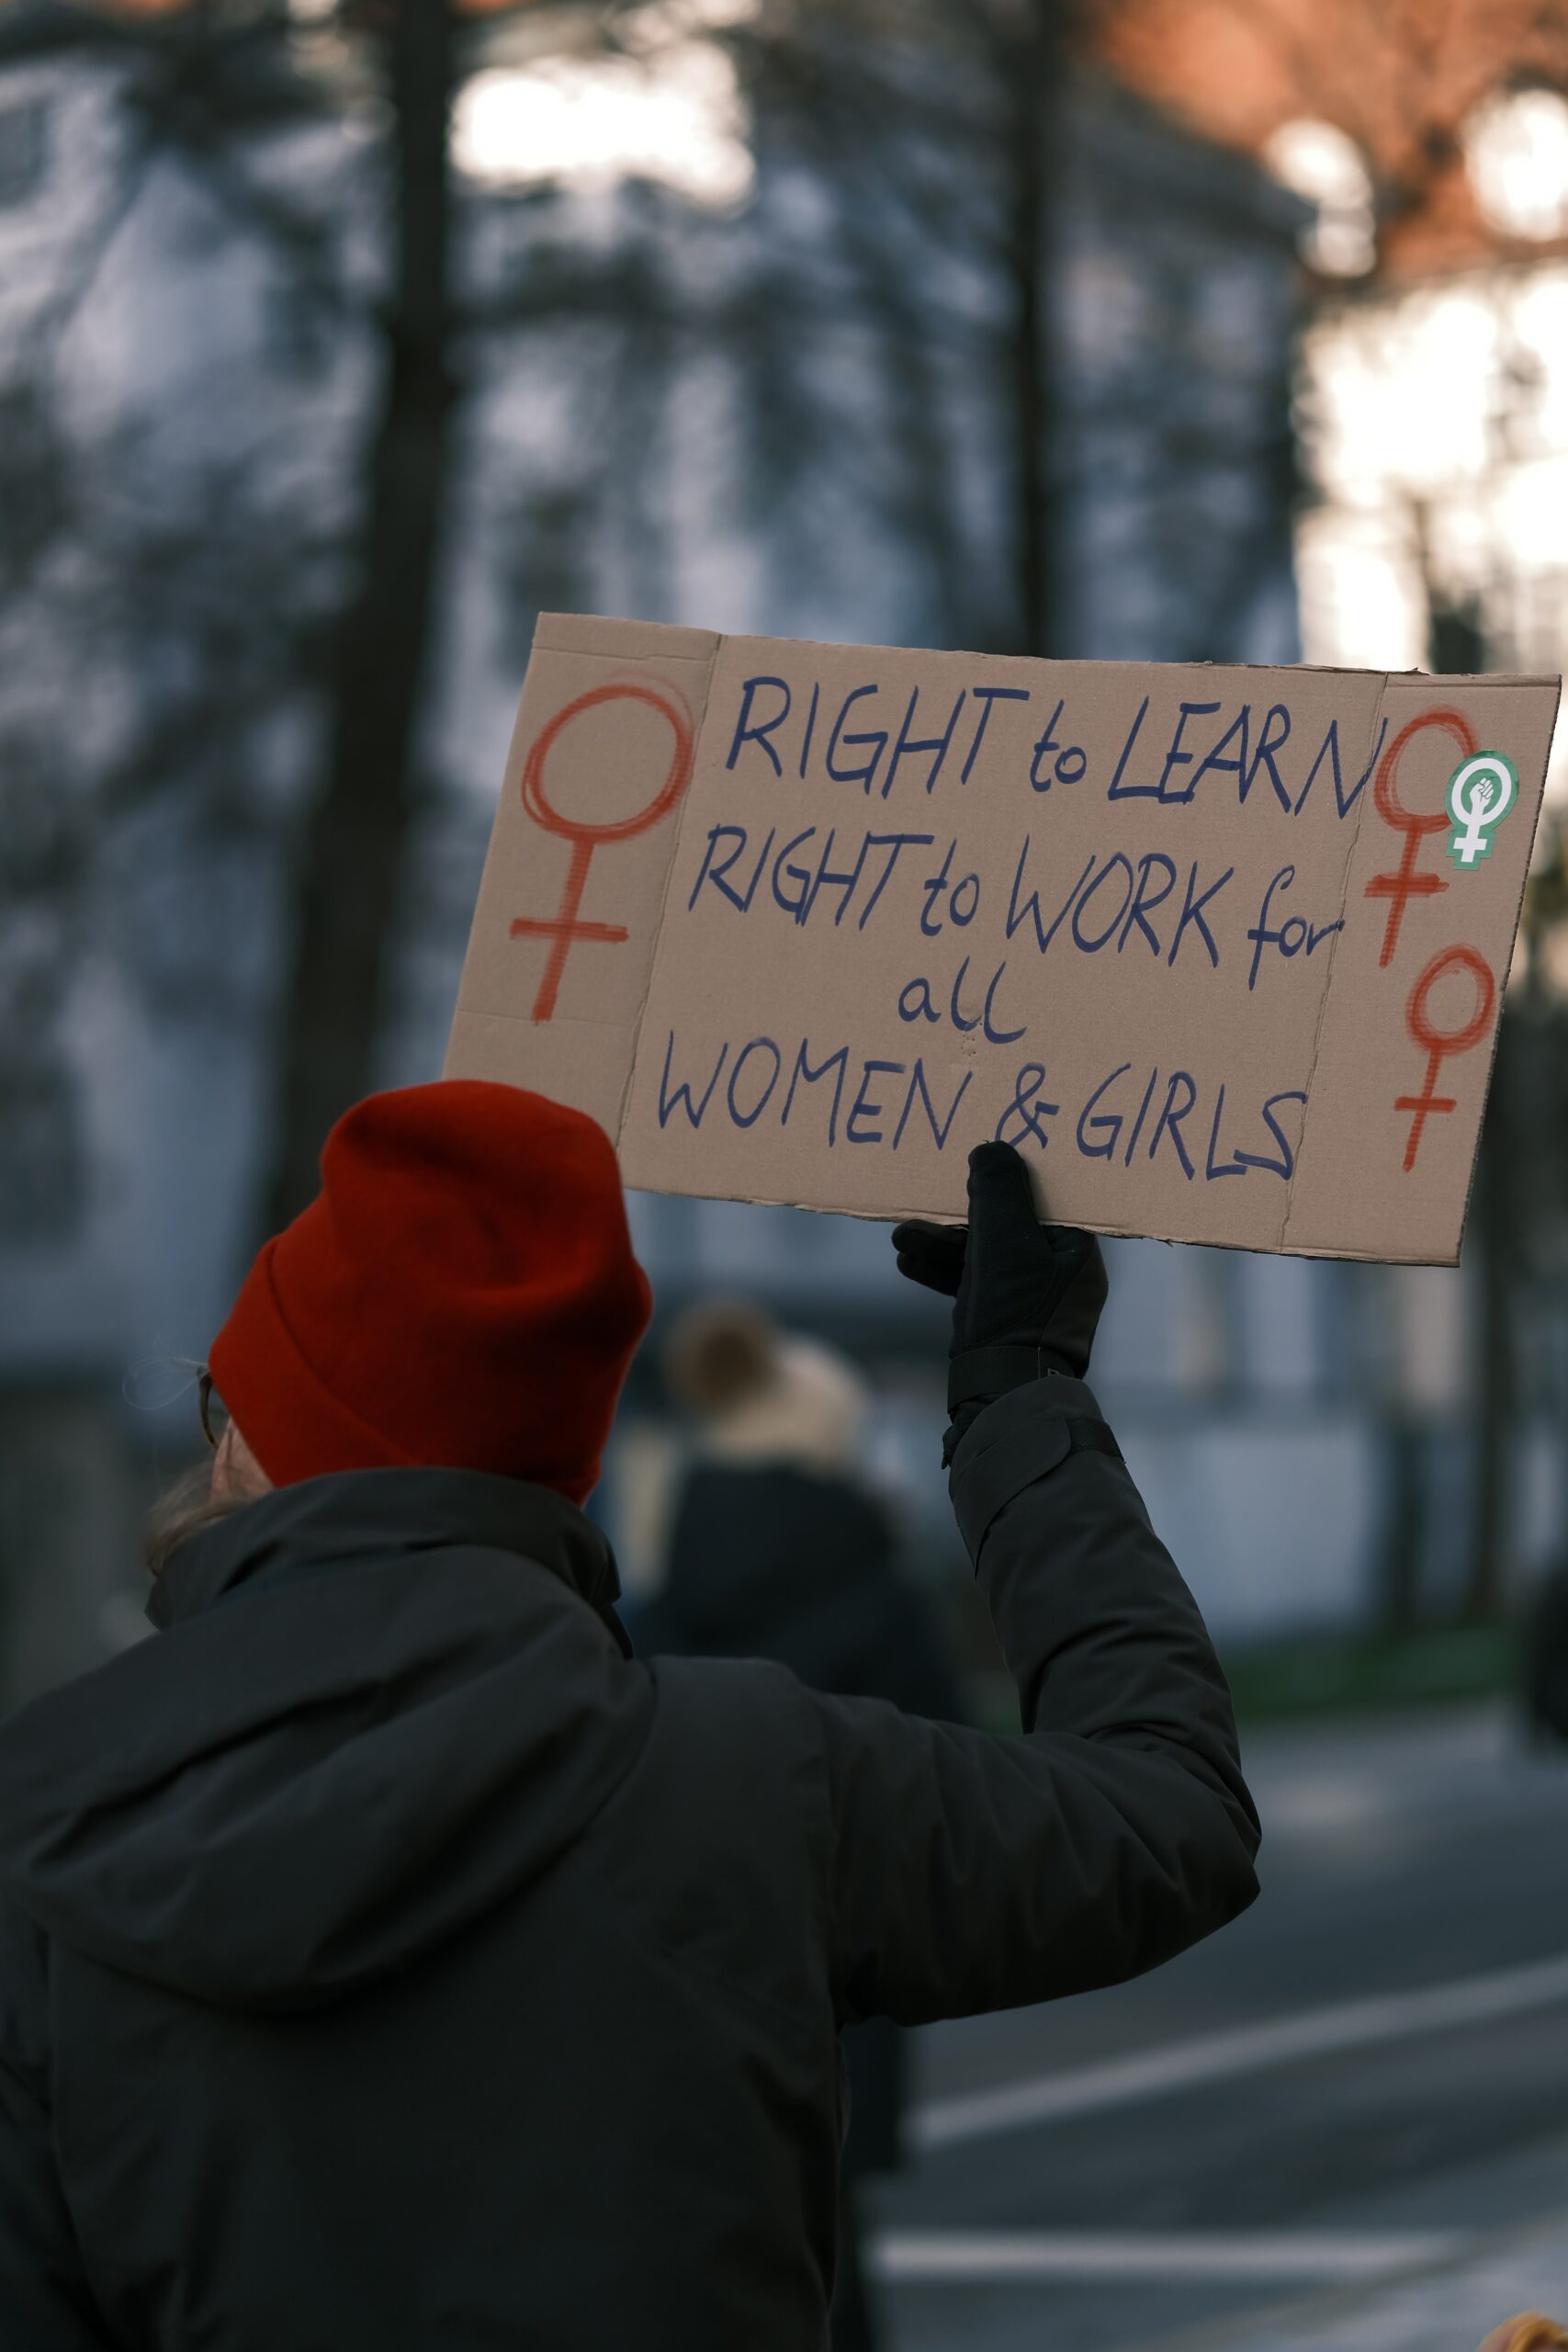 This is a photo of an individual, with their back to the camera, holding a sign that reads “Right to Learn. Right to Work for all Women and Girls.”